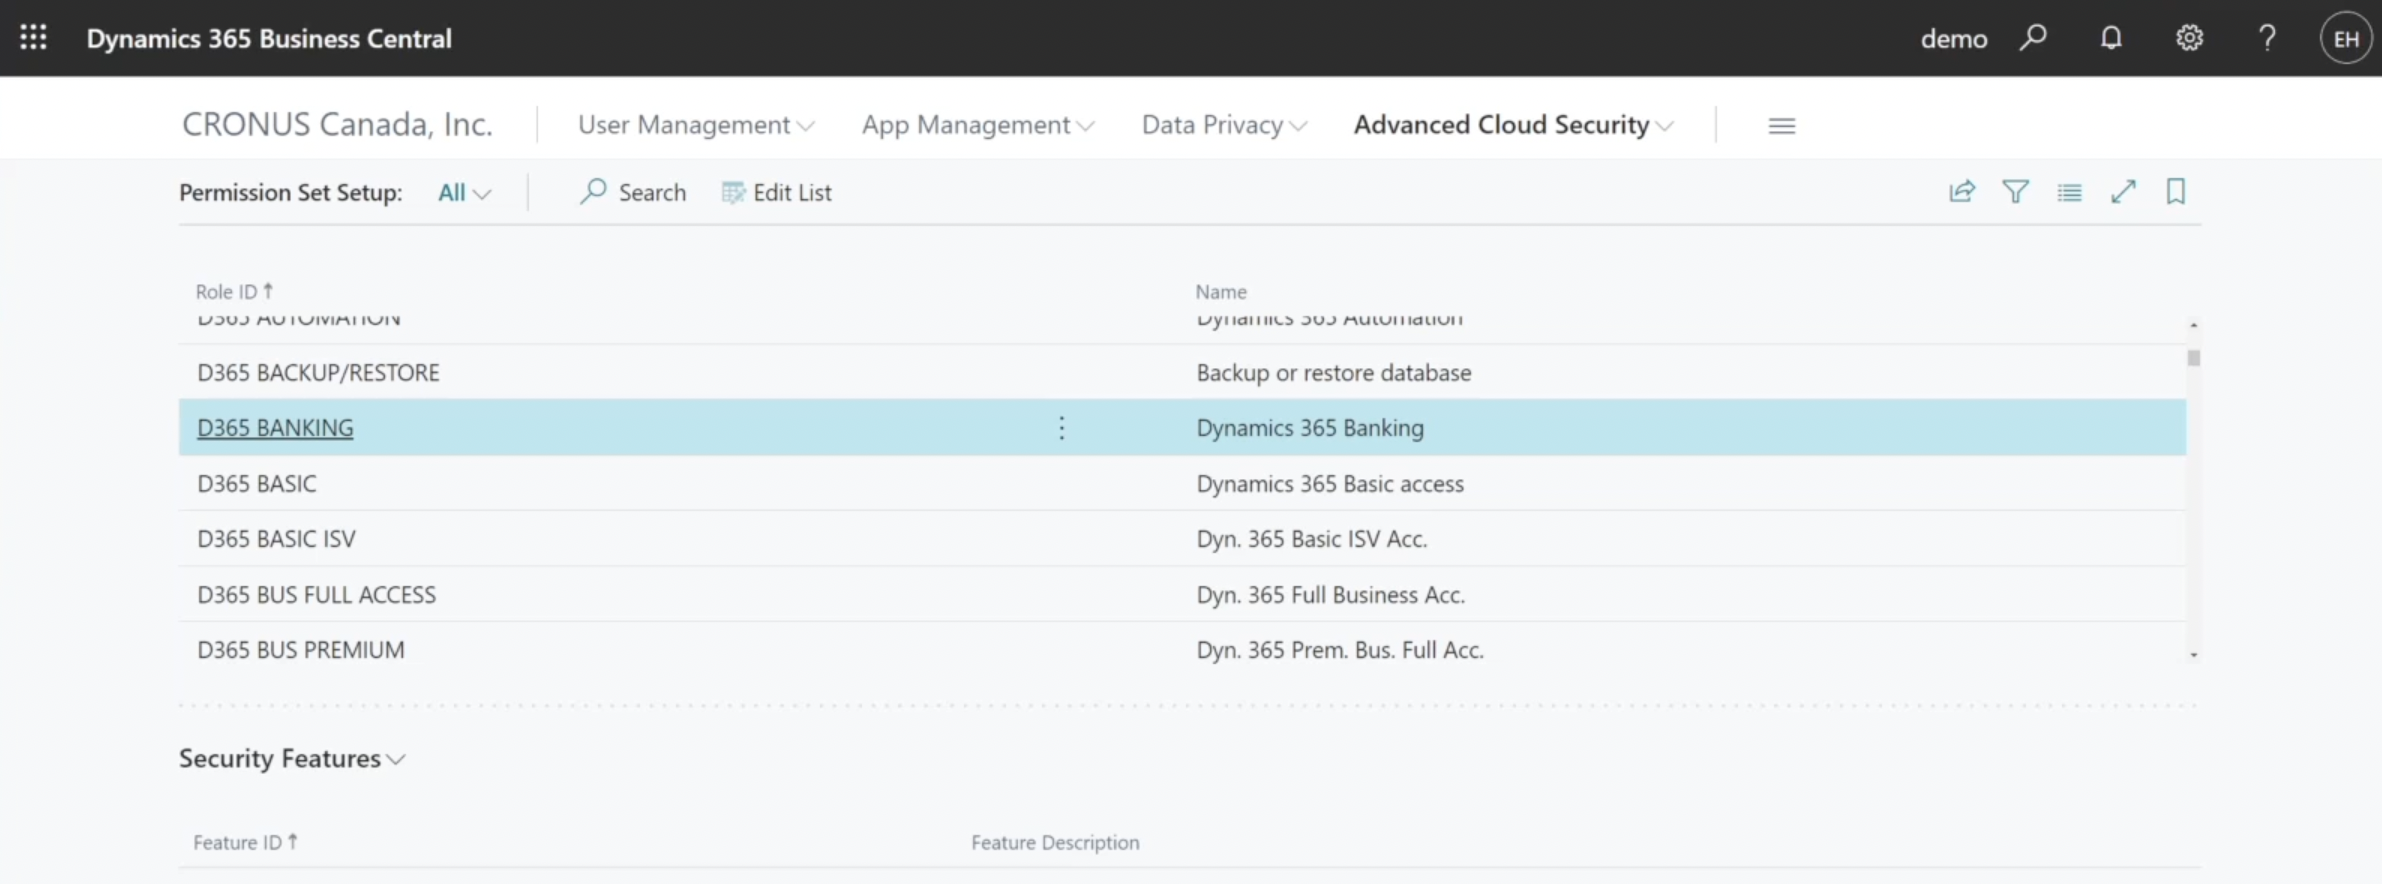 assigning security feature to an existing permission set in Dynamics 365 Business Central